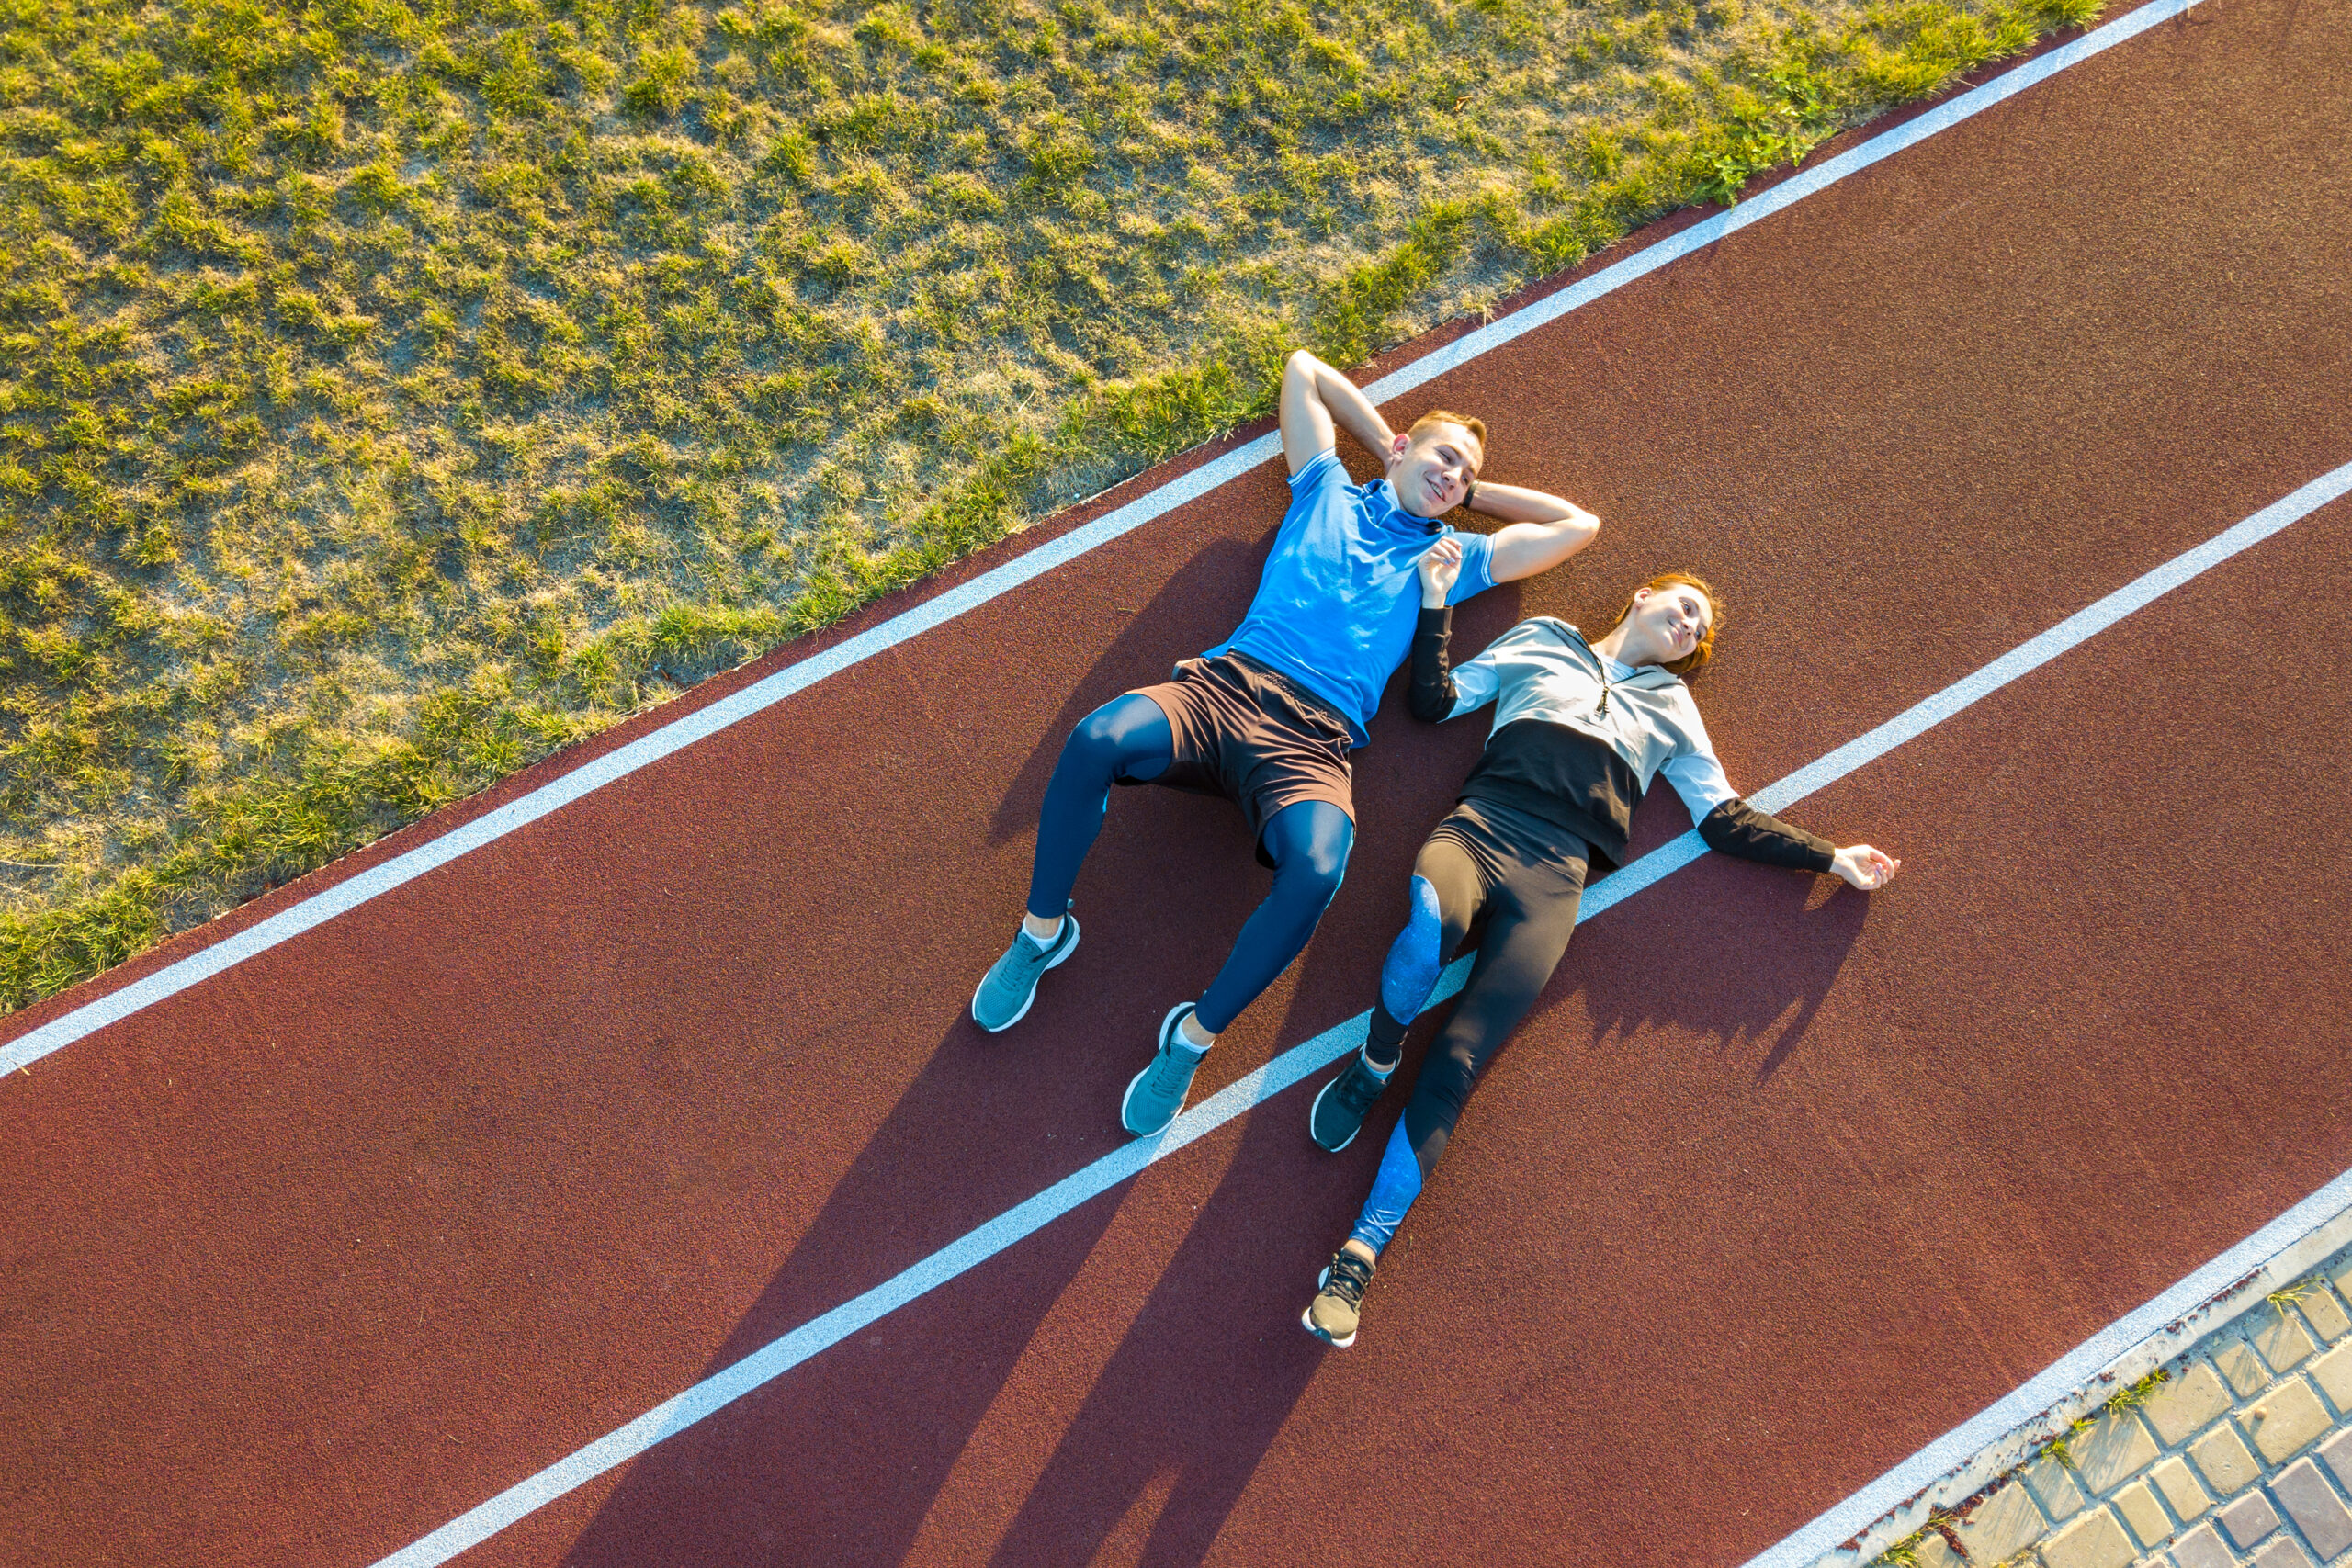 Two athletes rest on the running track during their taper